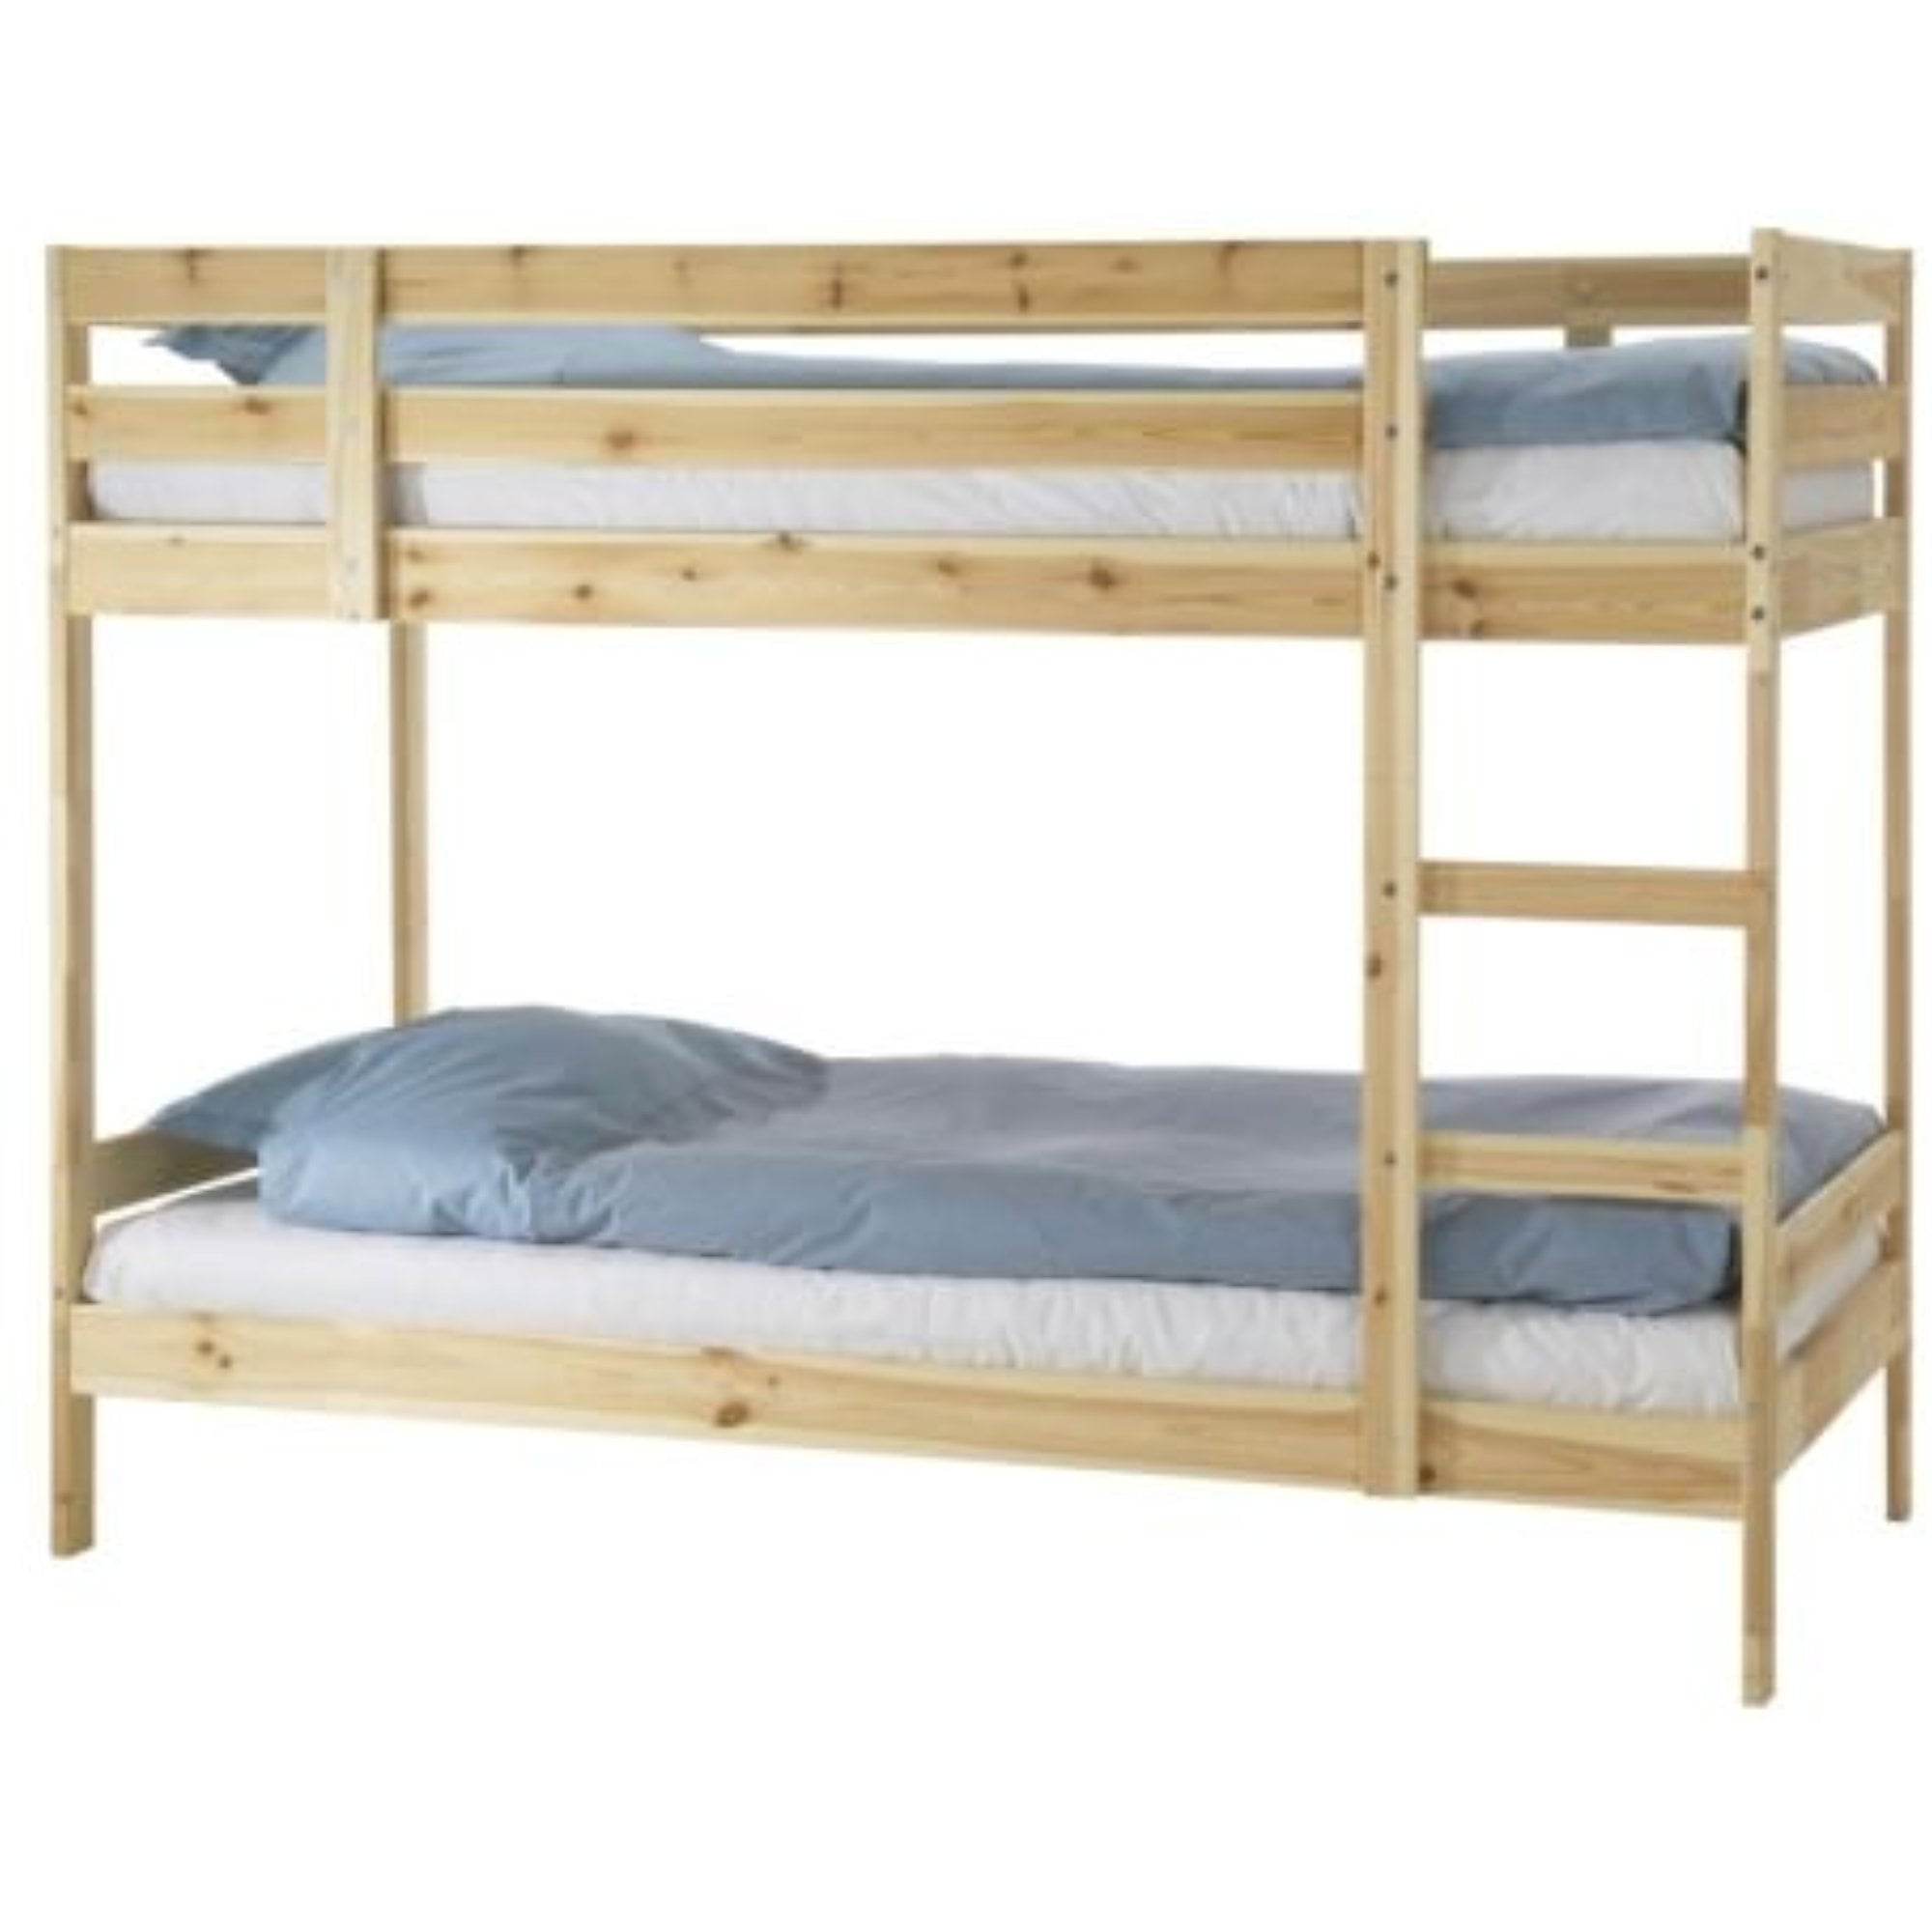 Ikea Twin Size Bunk Bed Frame Pine, Separable Bunk Beds Ikea